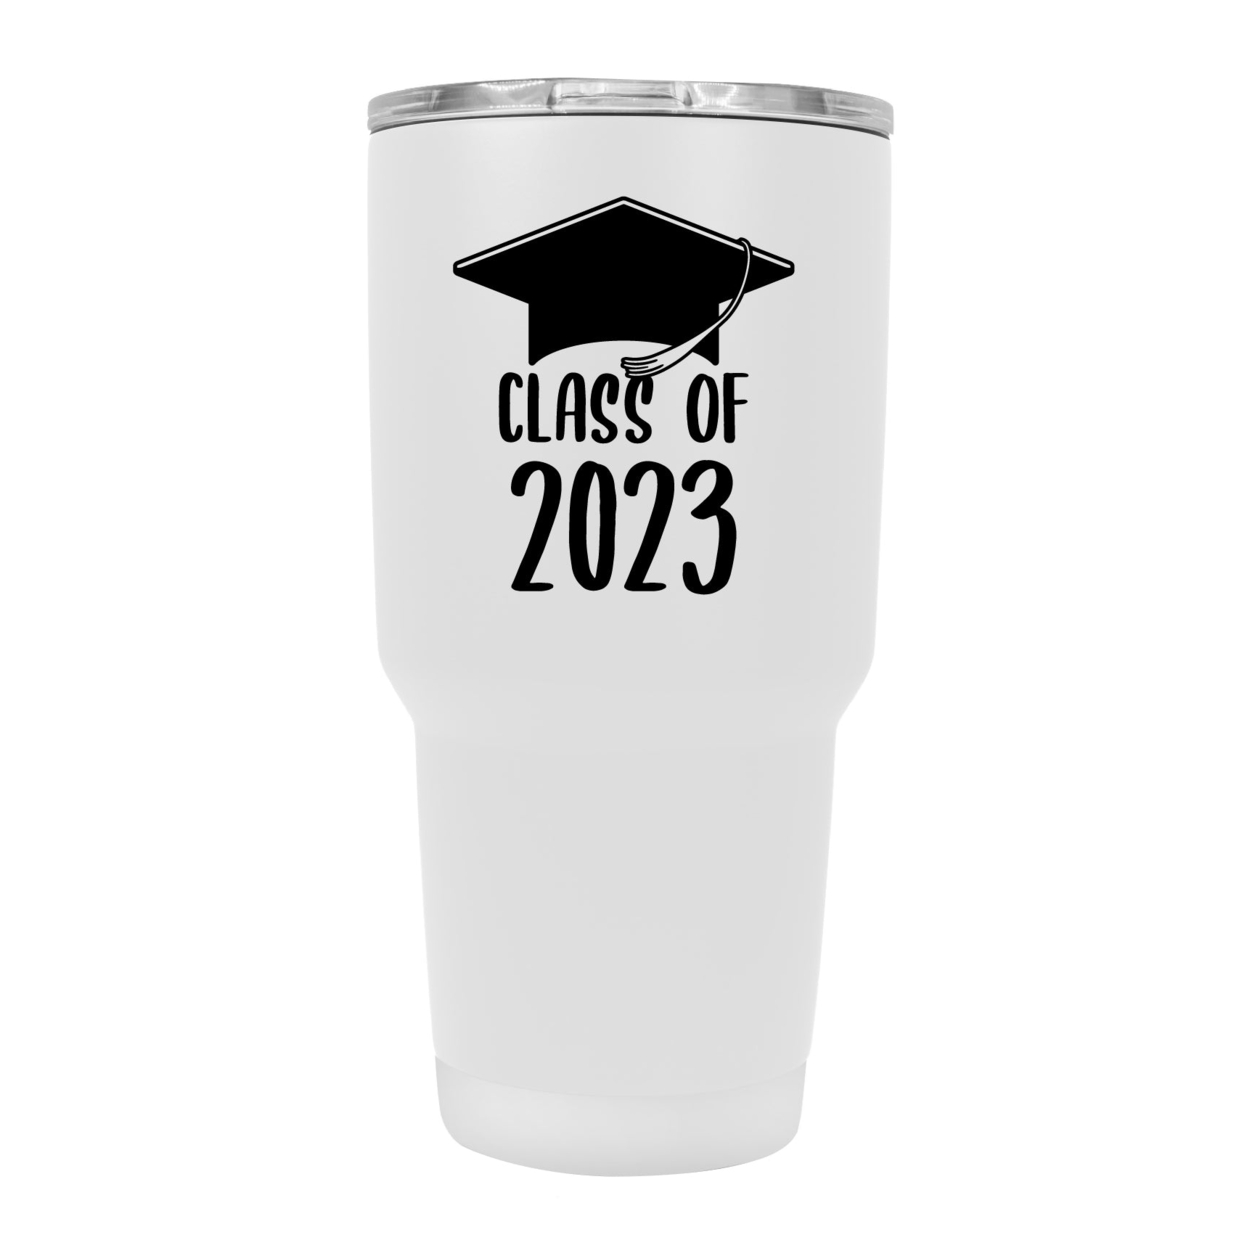 Class Of 2023 Graduation 24 Oz Insulated Stainless Steel Tumbler Navy - Black